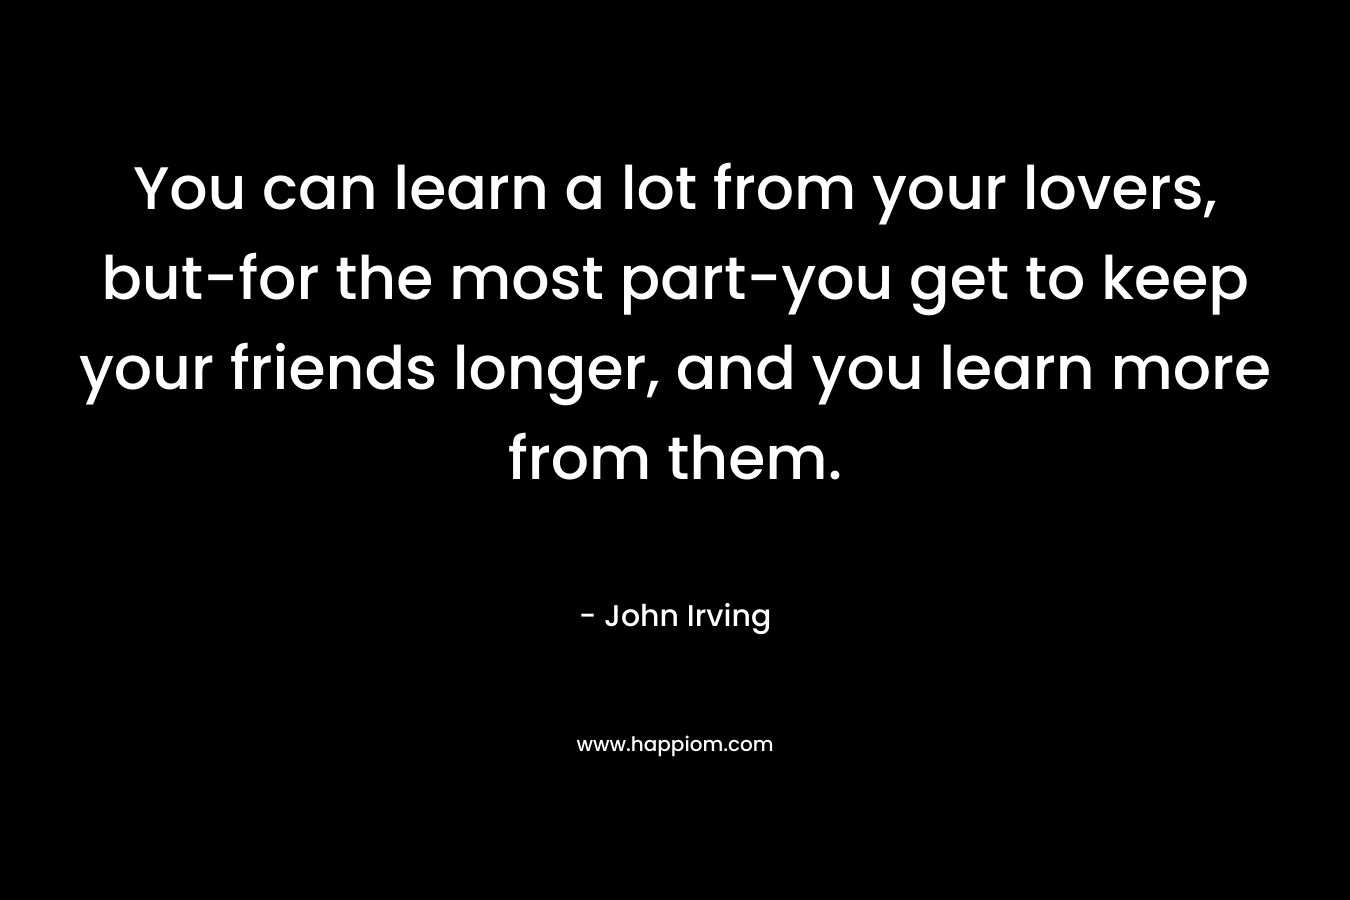 You can learn a lot from your lovers, but-for the most part-you get to keep your friends longer, and you learn more from them. – John Irving